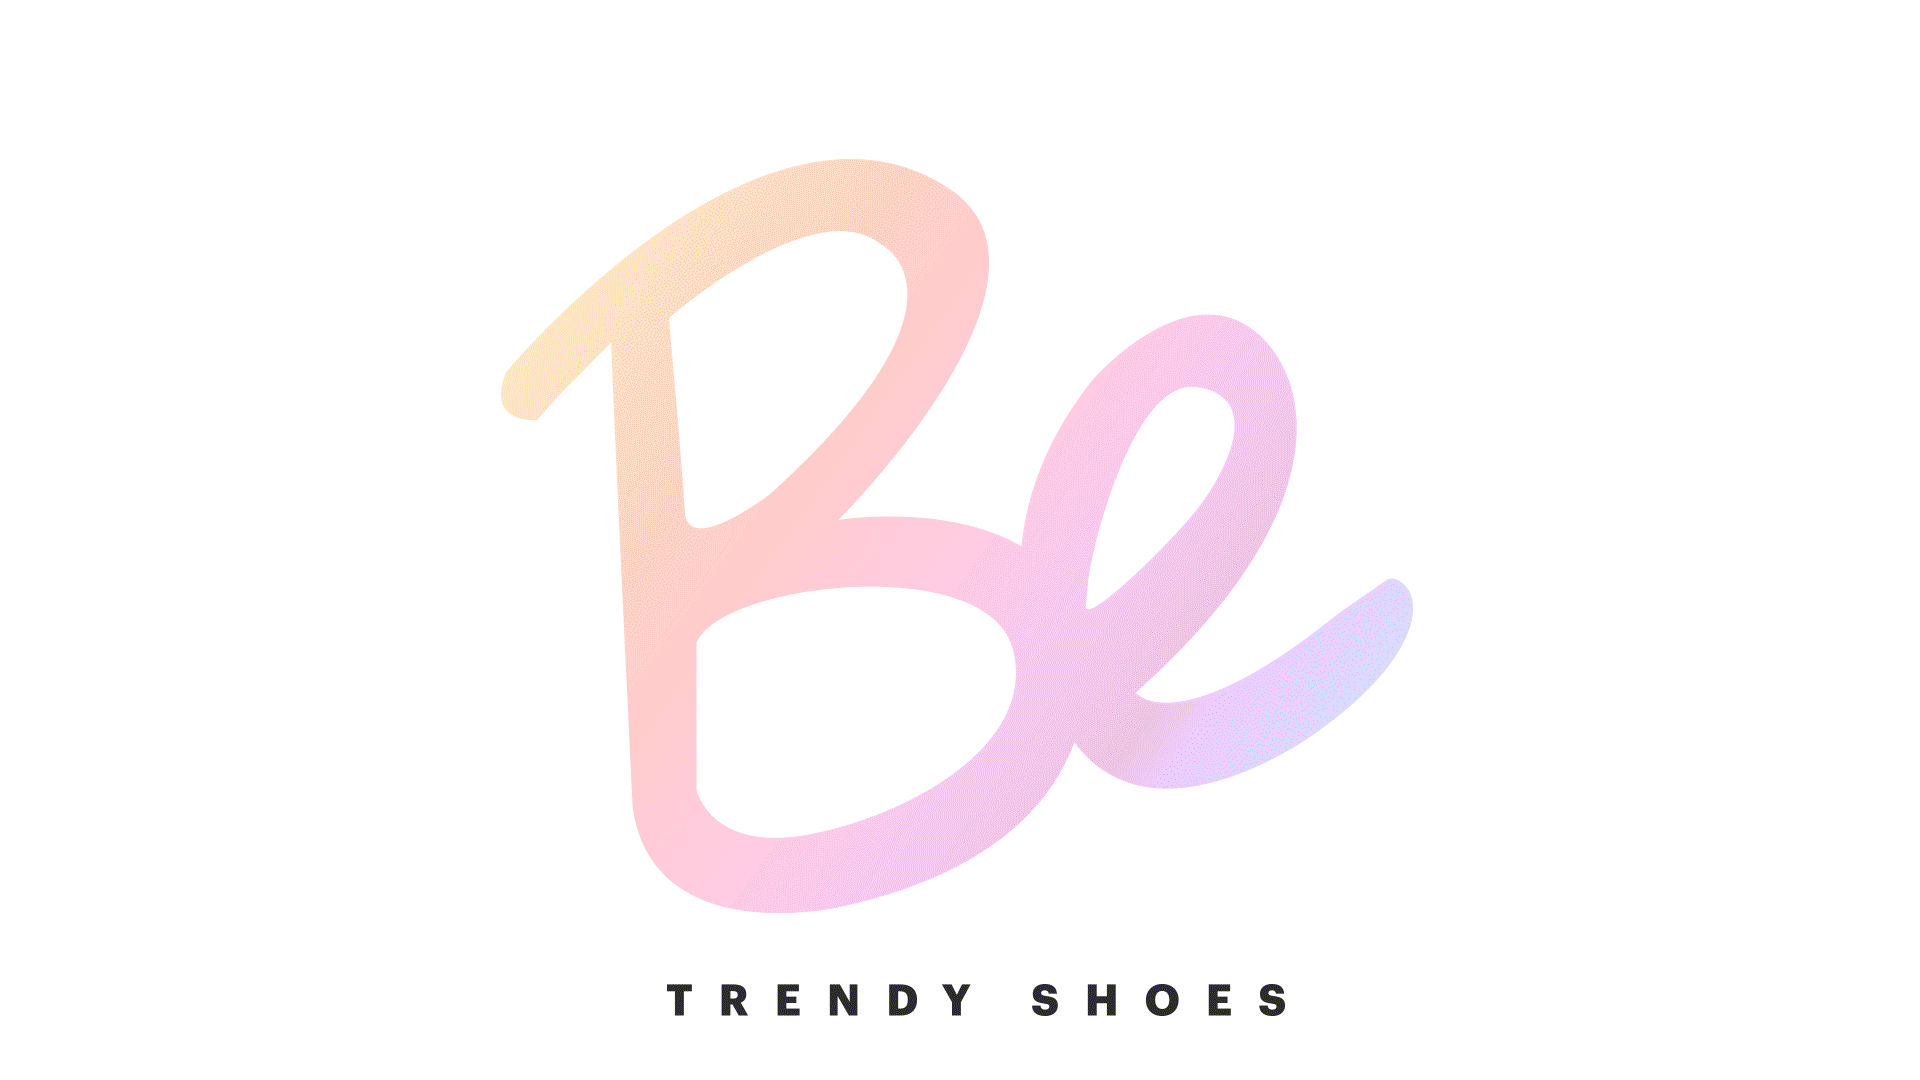 Branding Be Shoes